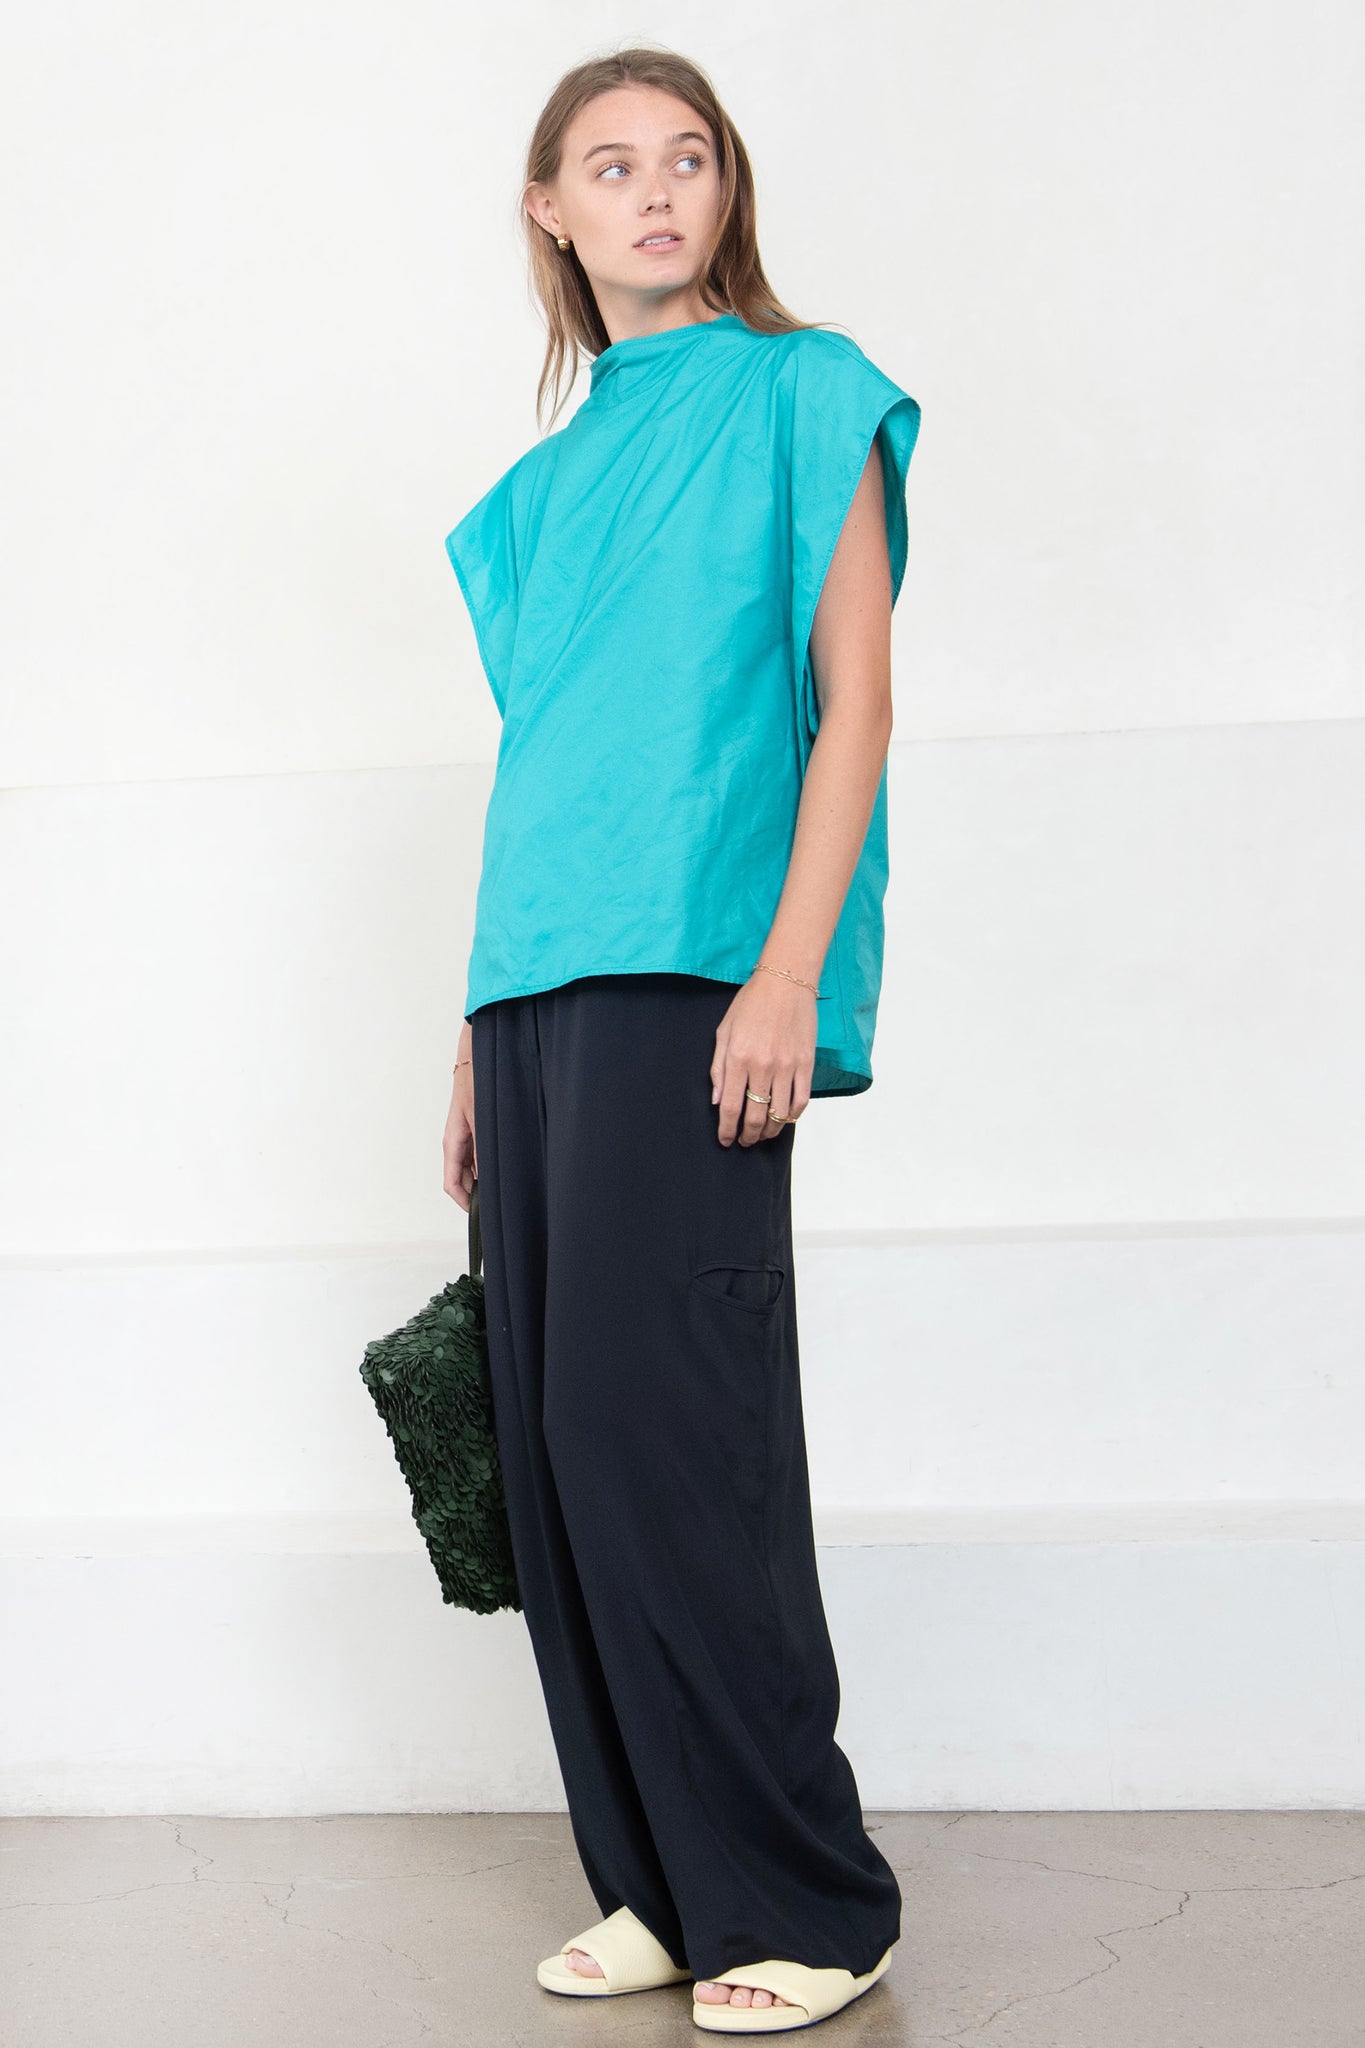 Hache - Kate Shirt, Turquoise